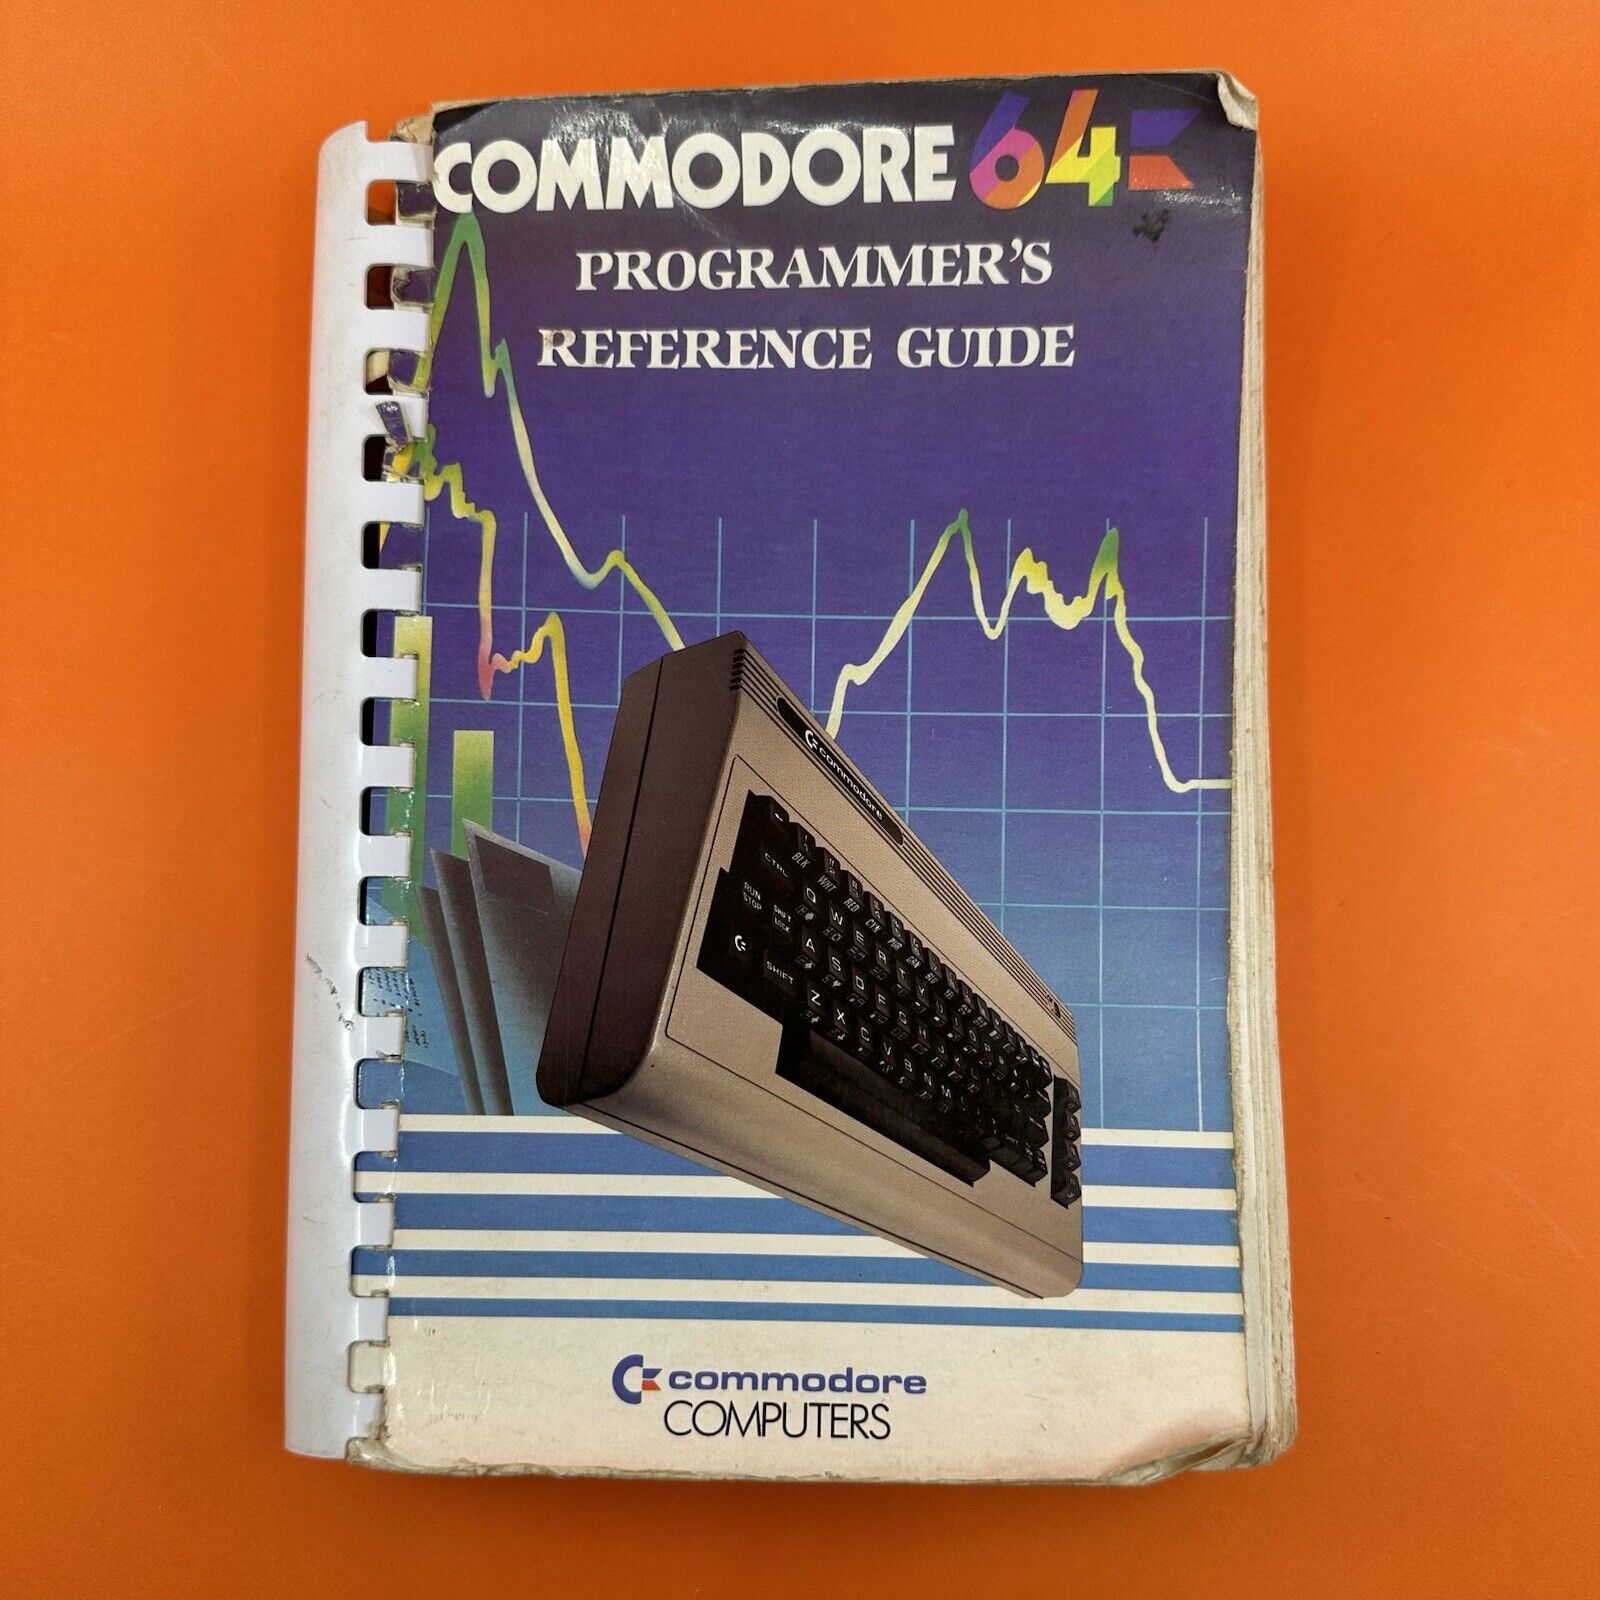 Commodore 64 C64 Programmer's Reference Guide First Edition 11th Printing 1984